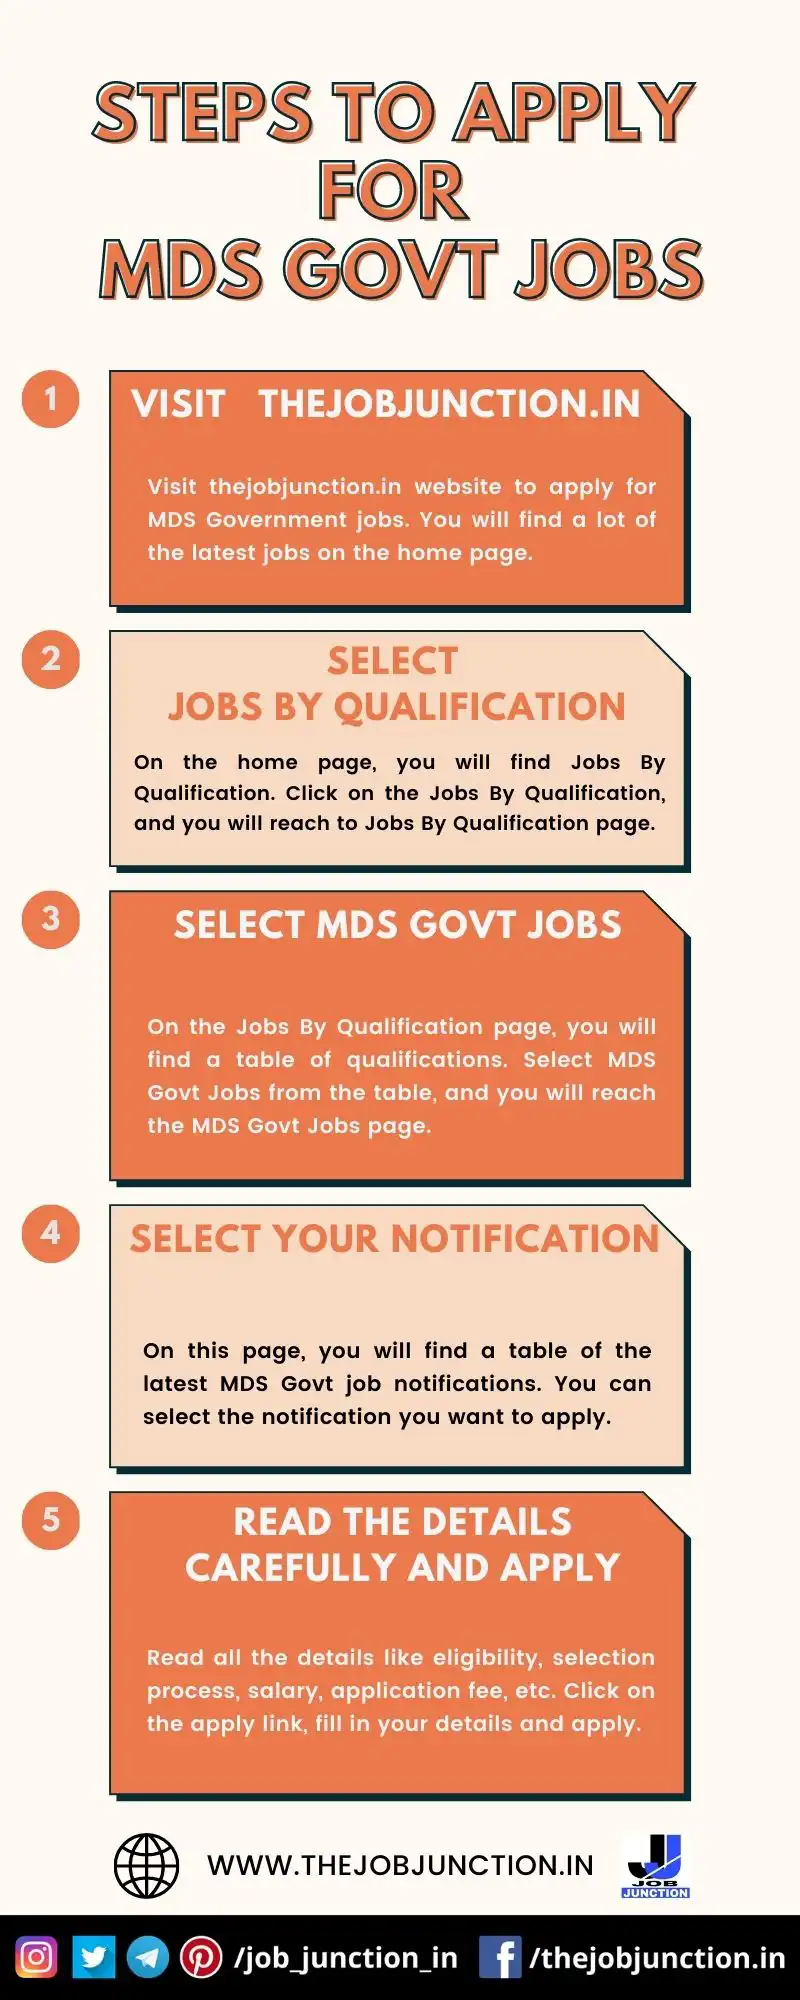 STEPS TO APPLY FOR MDS GOVT JOBS